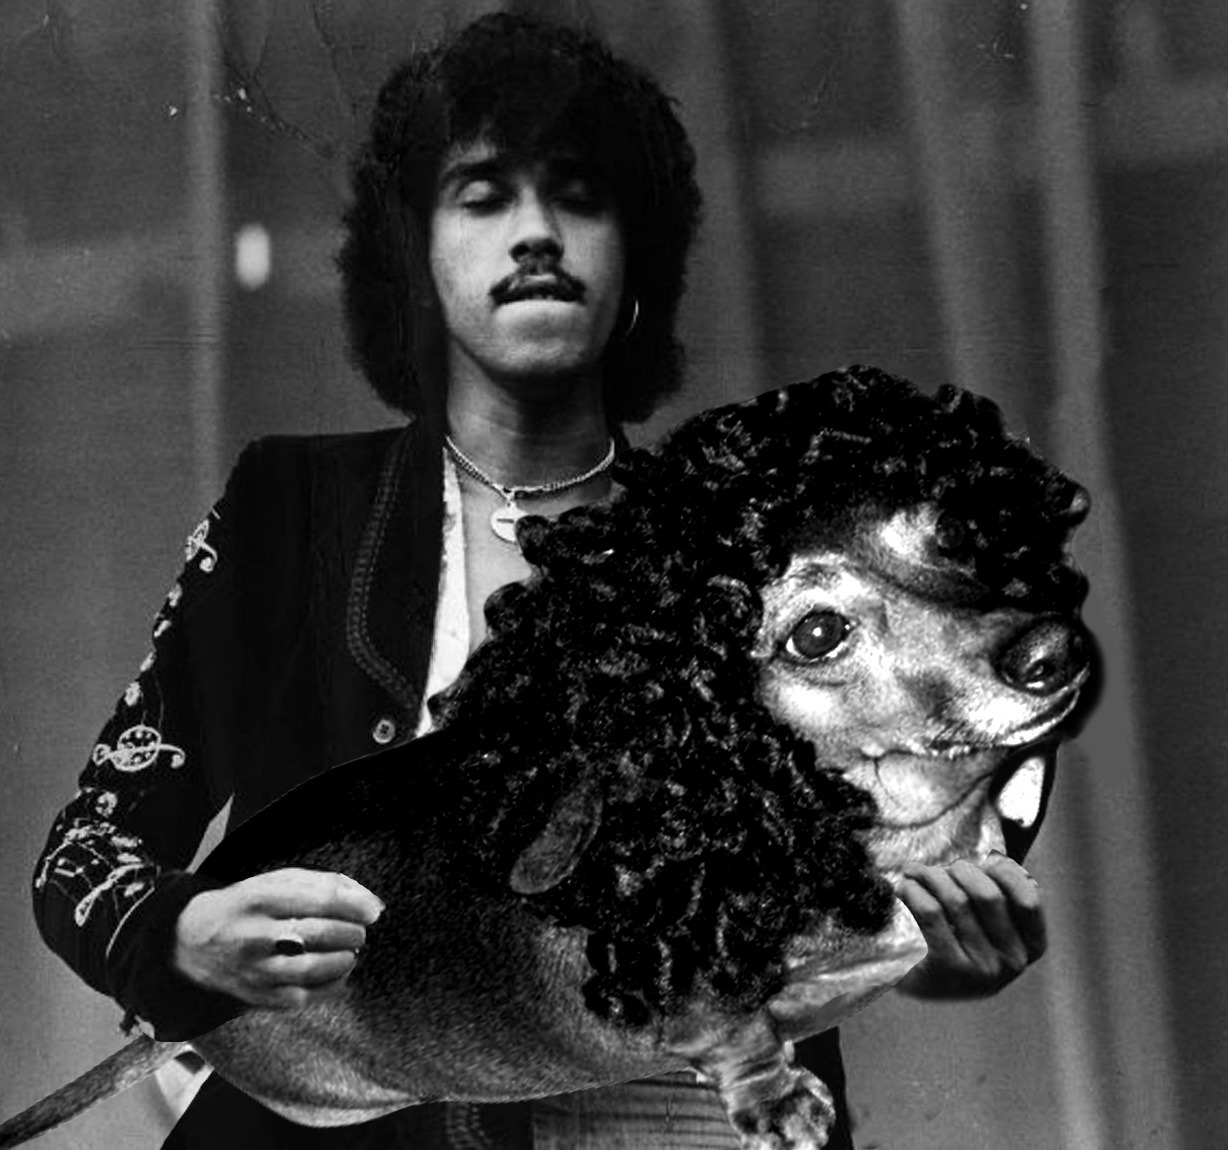 THE DOGS ARE BACK IN TOWN (Phil Lynott Bass Dog)